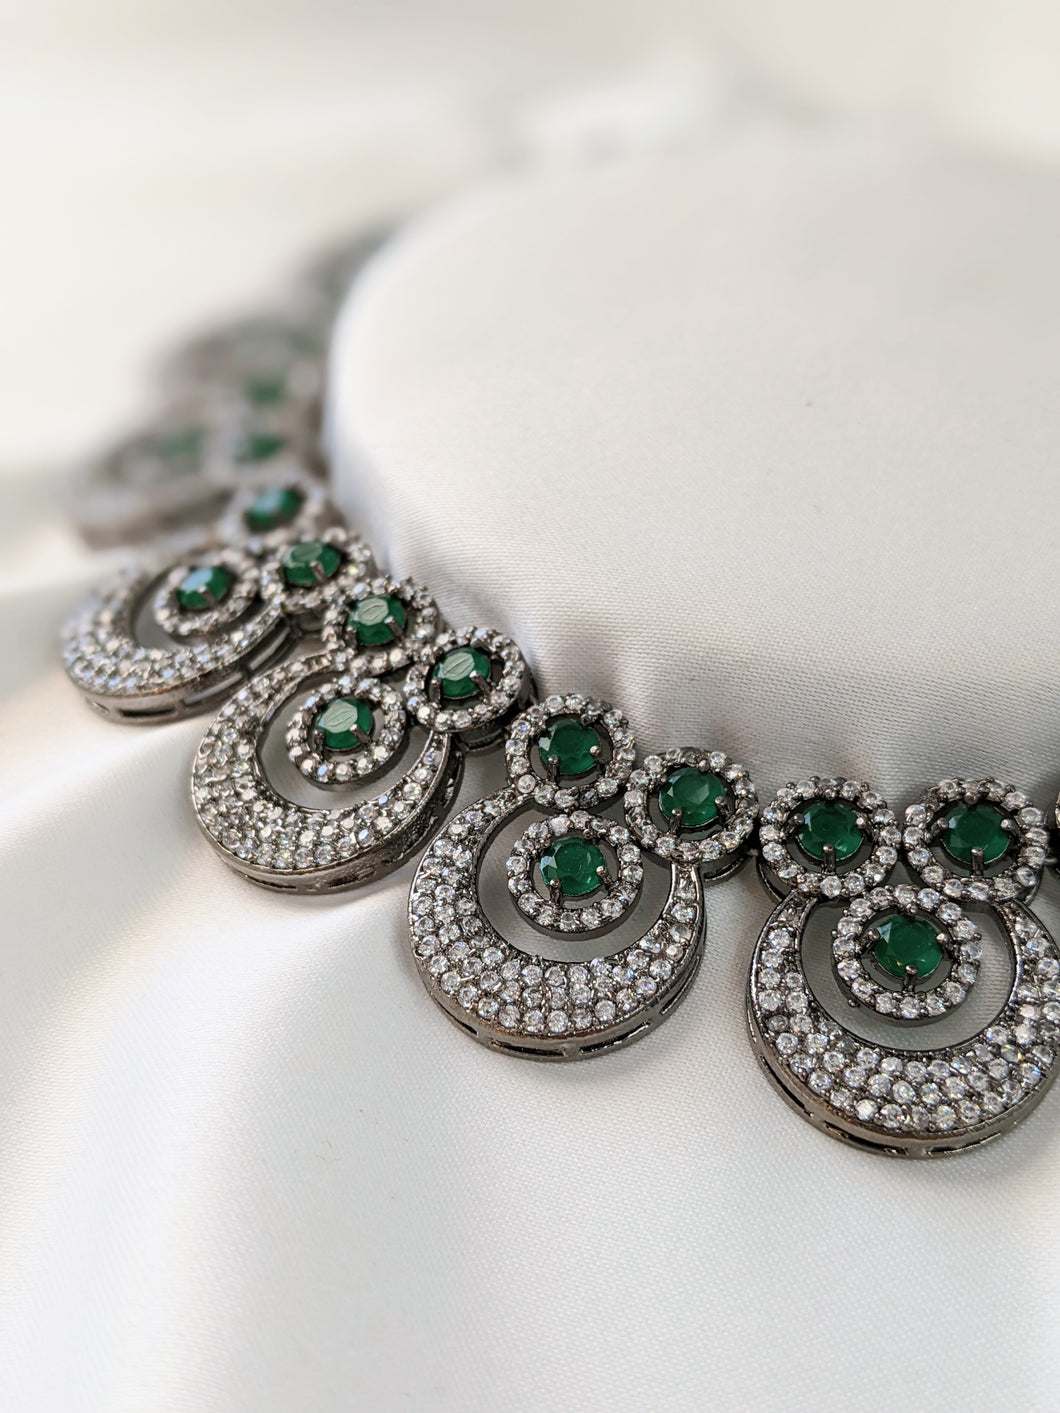 Very elegant American Diamond necklace with green Emerald look-alike statement stones. Set in black metal base, this necklace is sheer elegance!